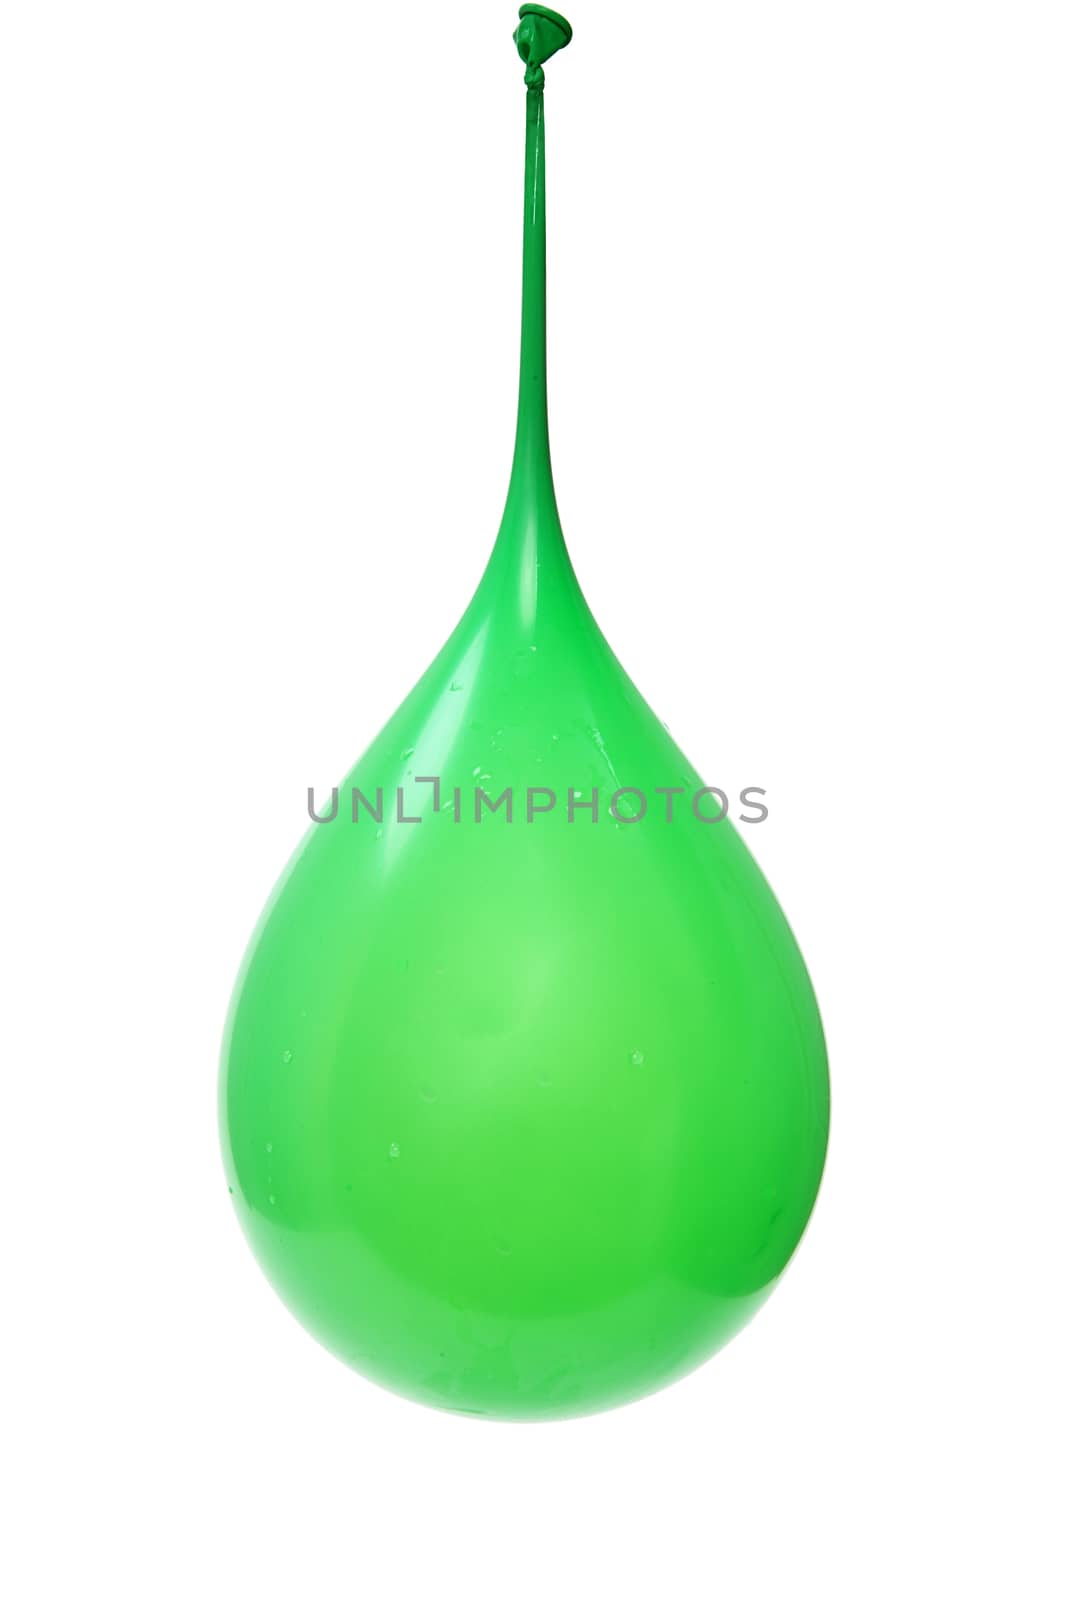 Water Filled Green Balloon Hanging Suspended Over White. by duplass